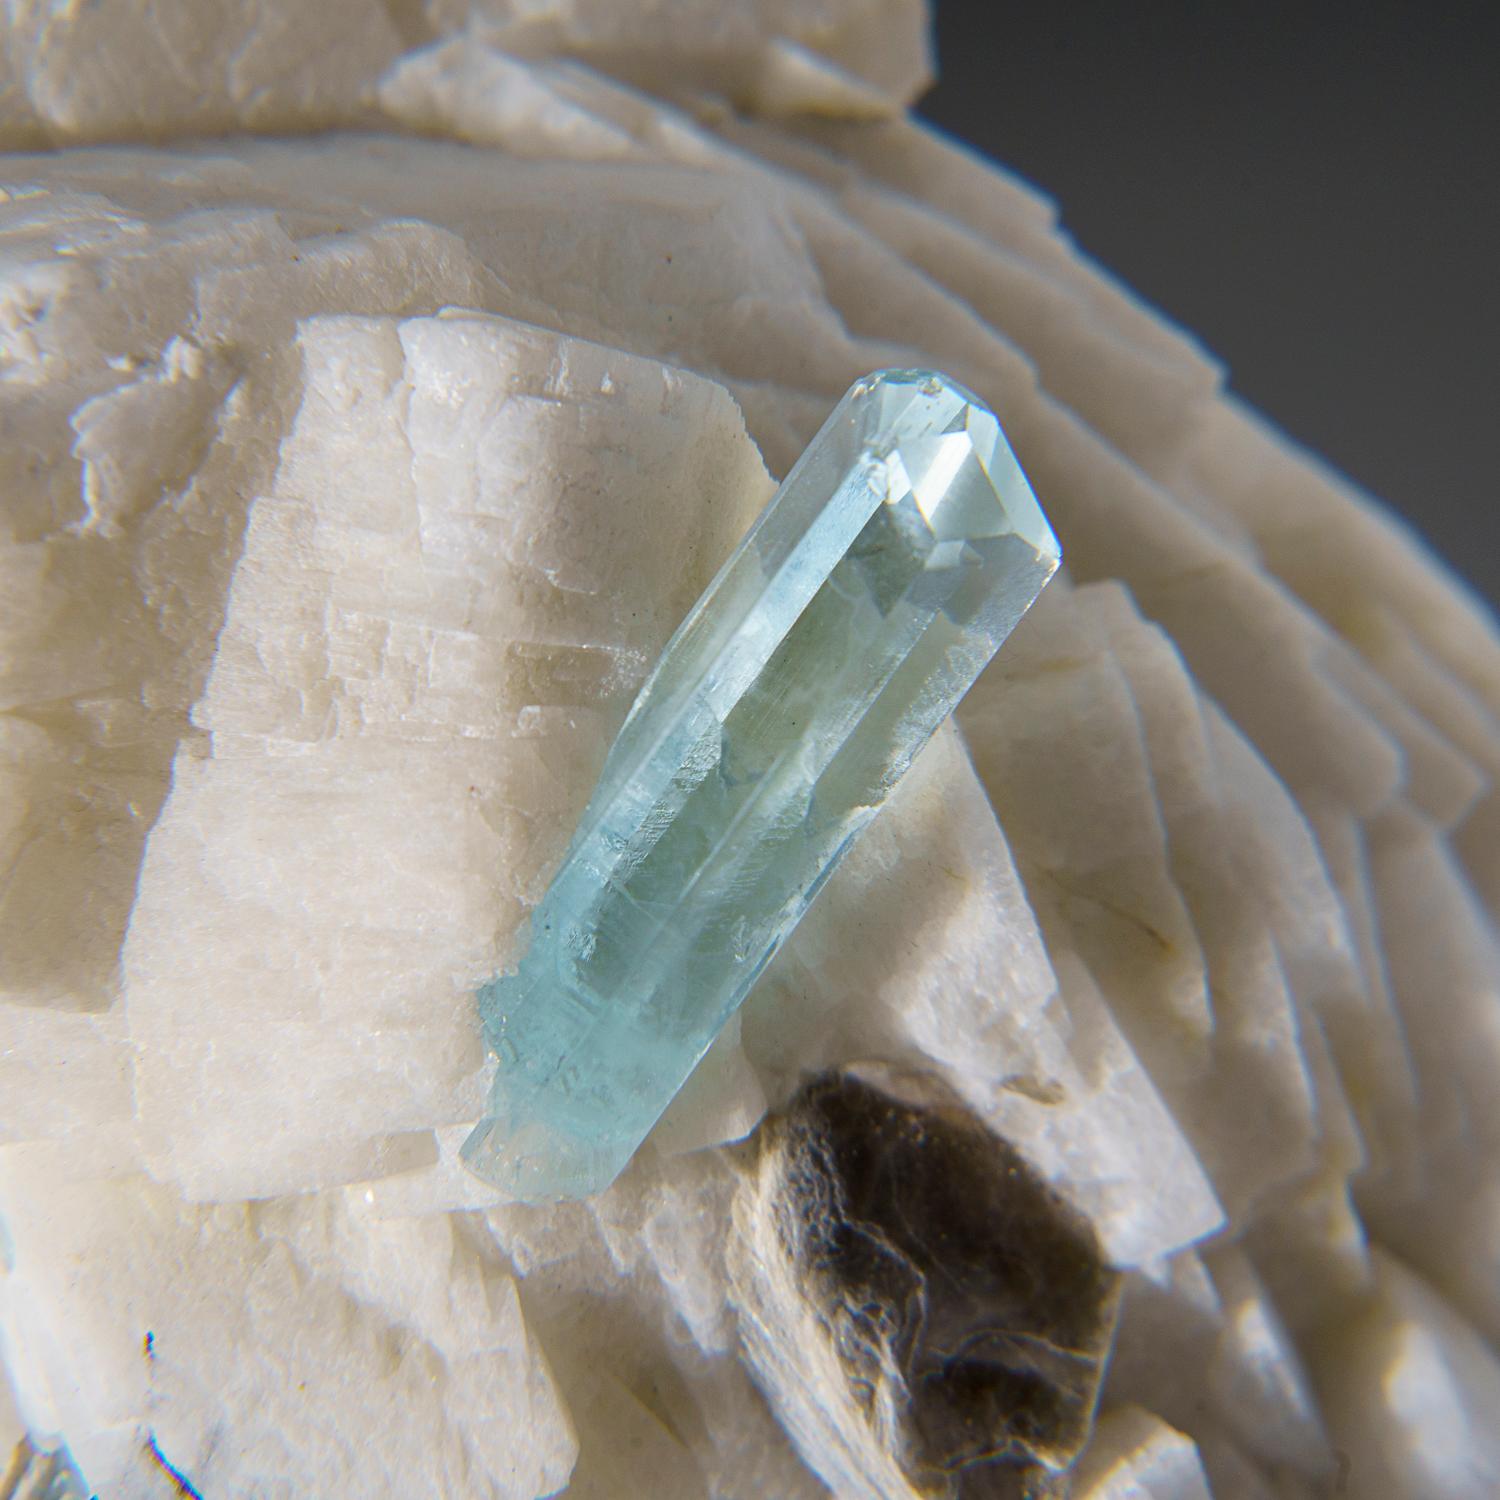 From Shigar Valley, Shigar District, Gilgit-Baltistan, Pakistan

Aesthetic cluster of white albite with several blue aquamarine crystals running through the middle. The aquamarine crystal is flawless internally and has microscopic patterns on the